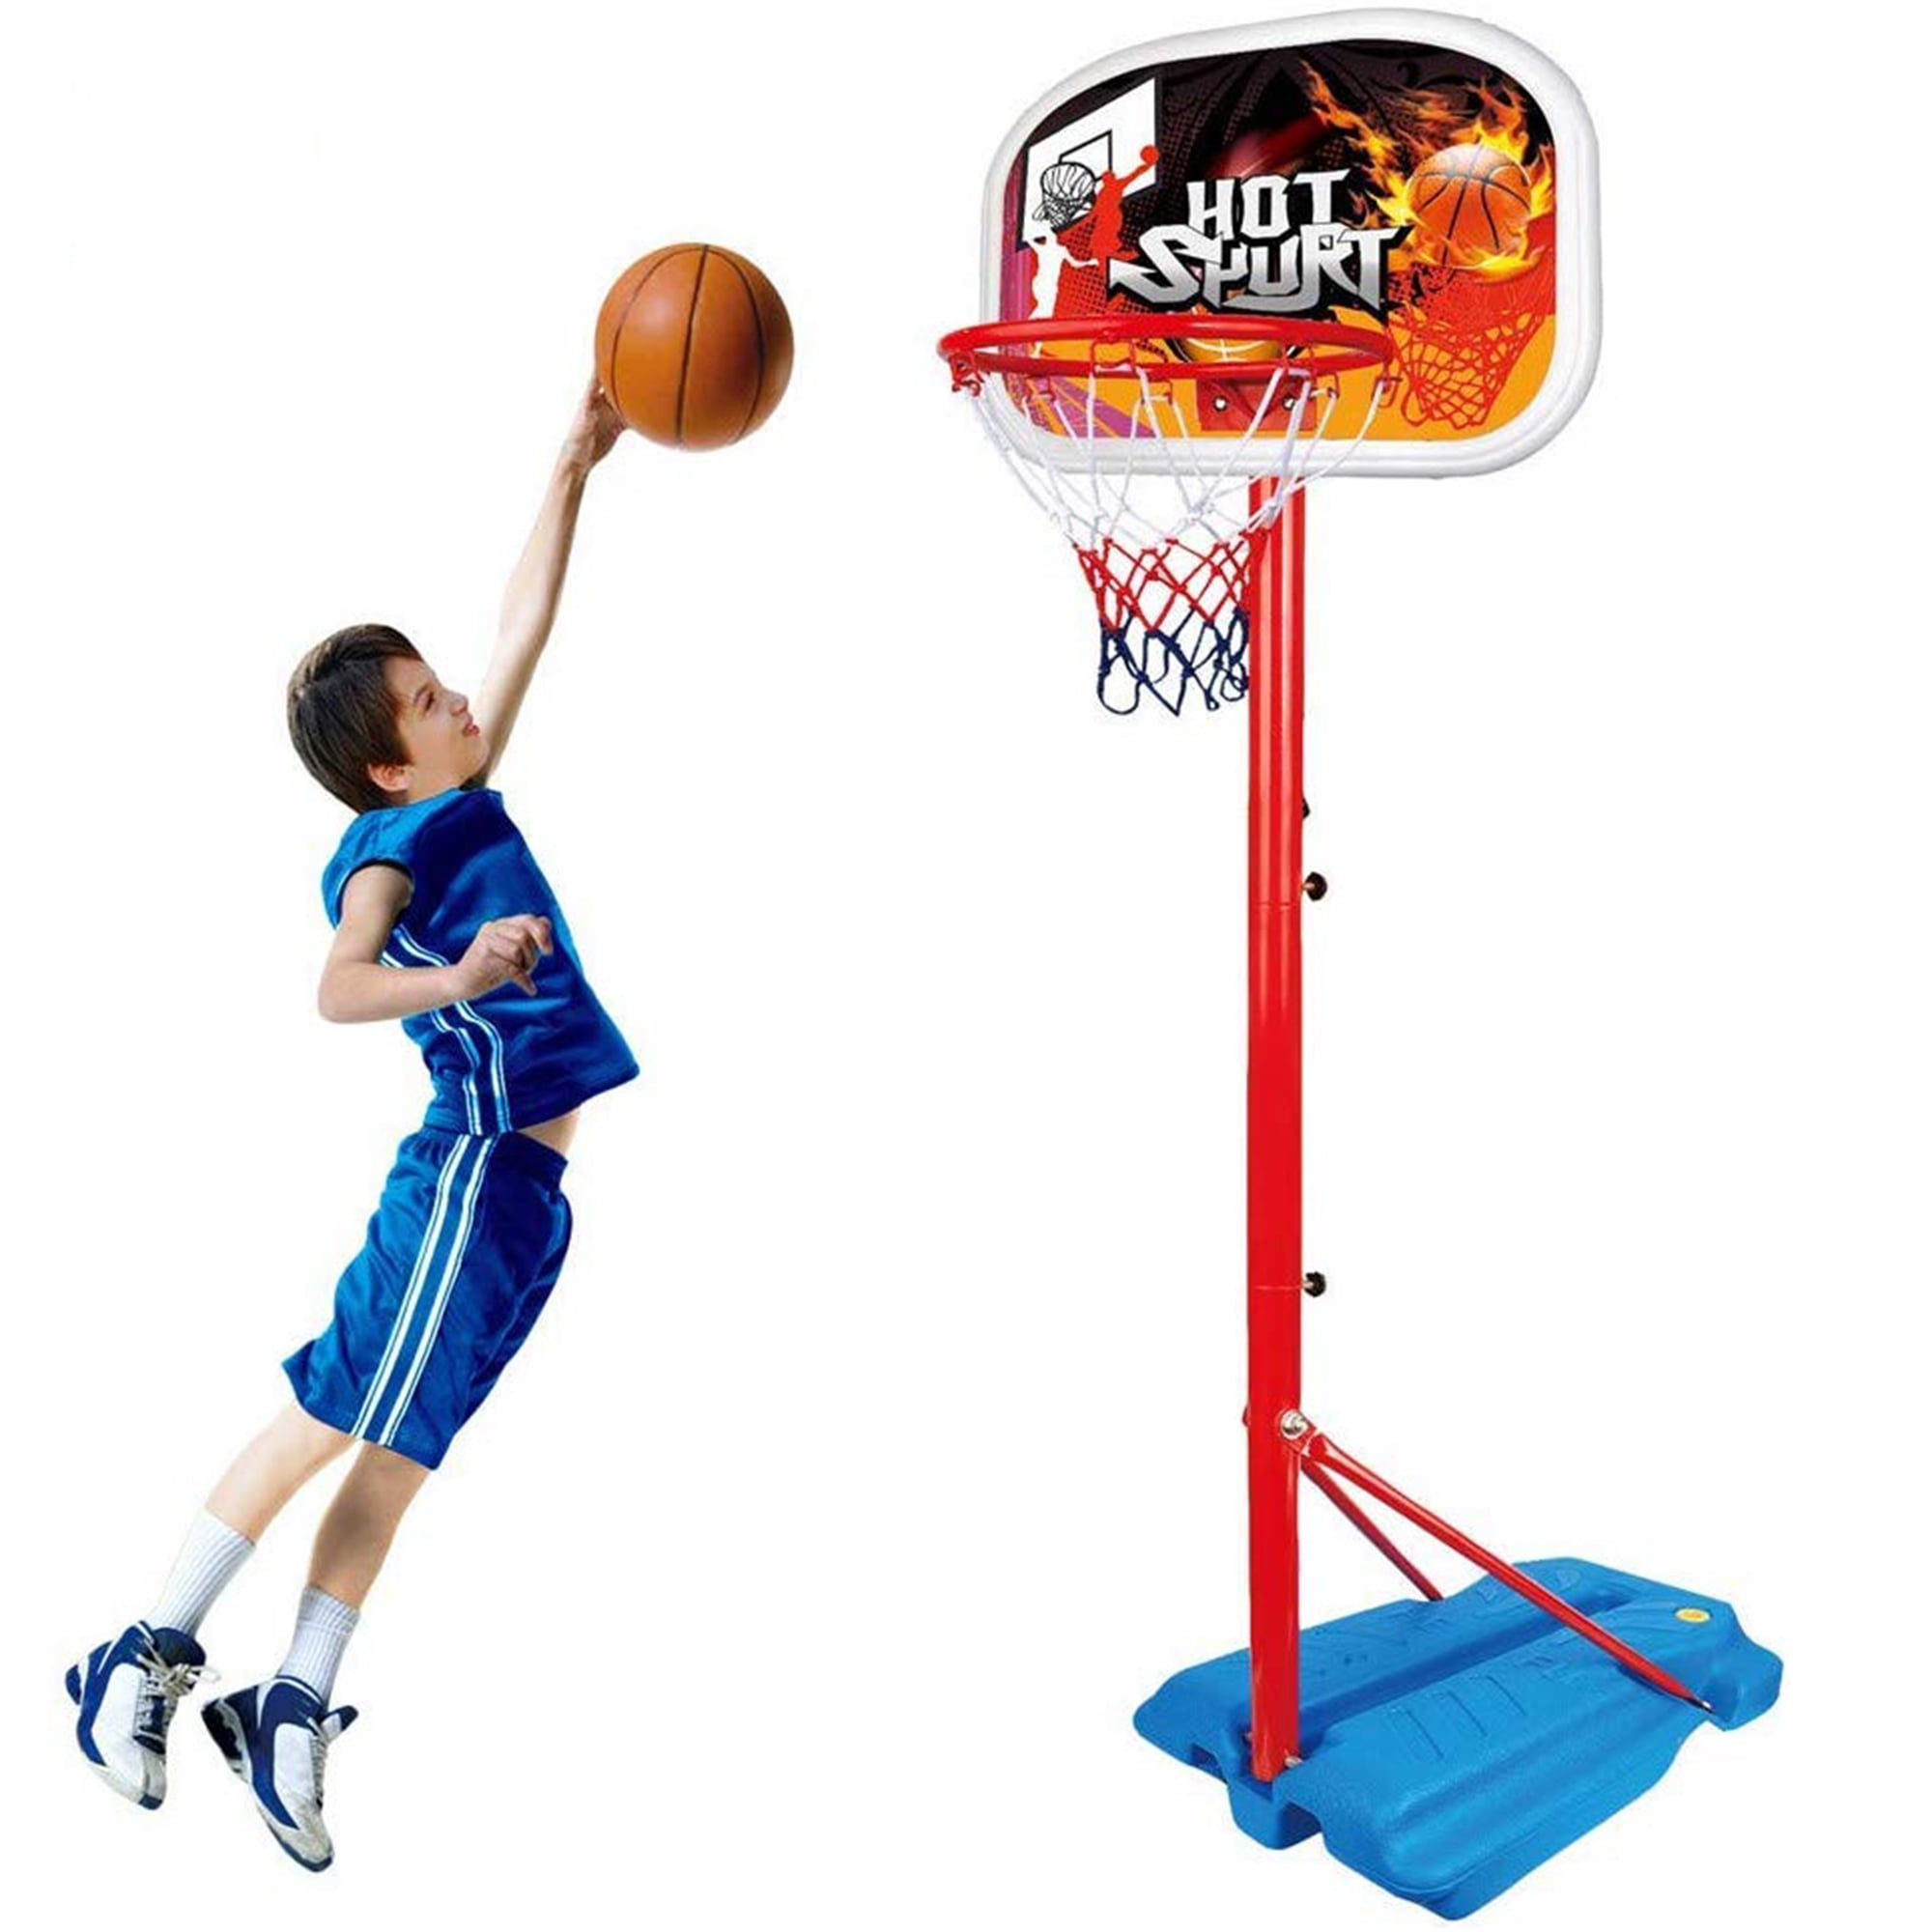 Adjustable Height Ball kids Mini Basketball Hoop and Stand Toy Game MINI Board 